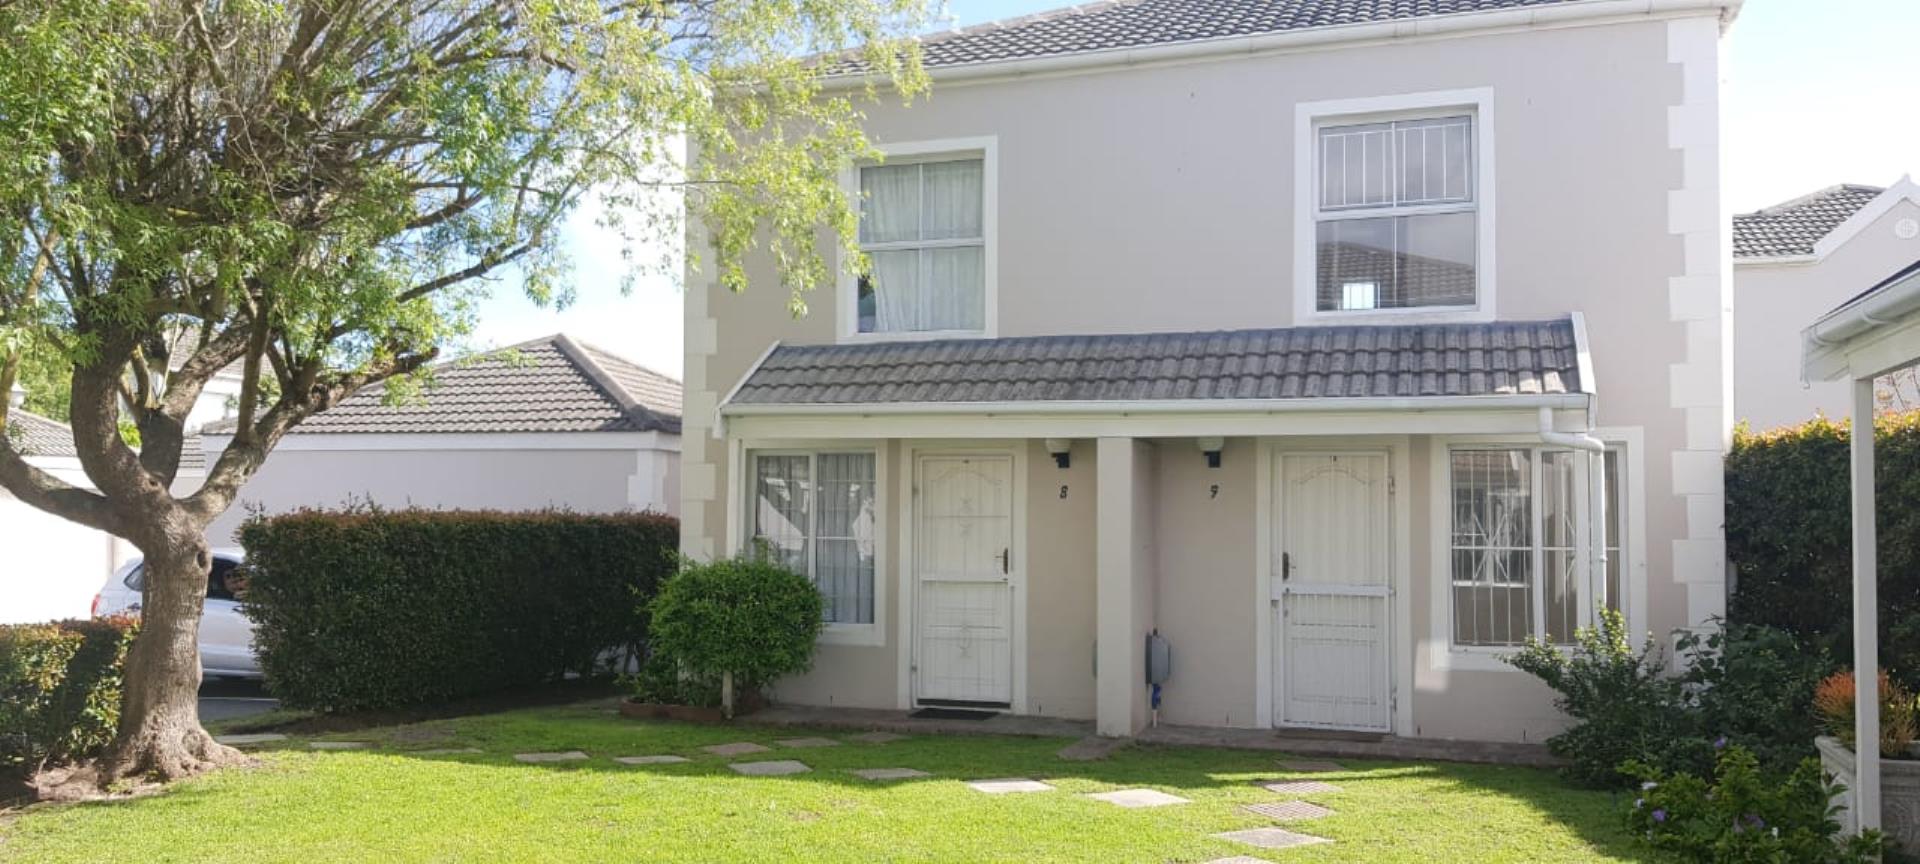 2 Bedroom Duplex for Sale - Western Cape